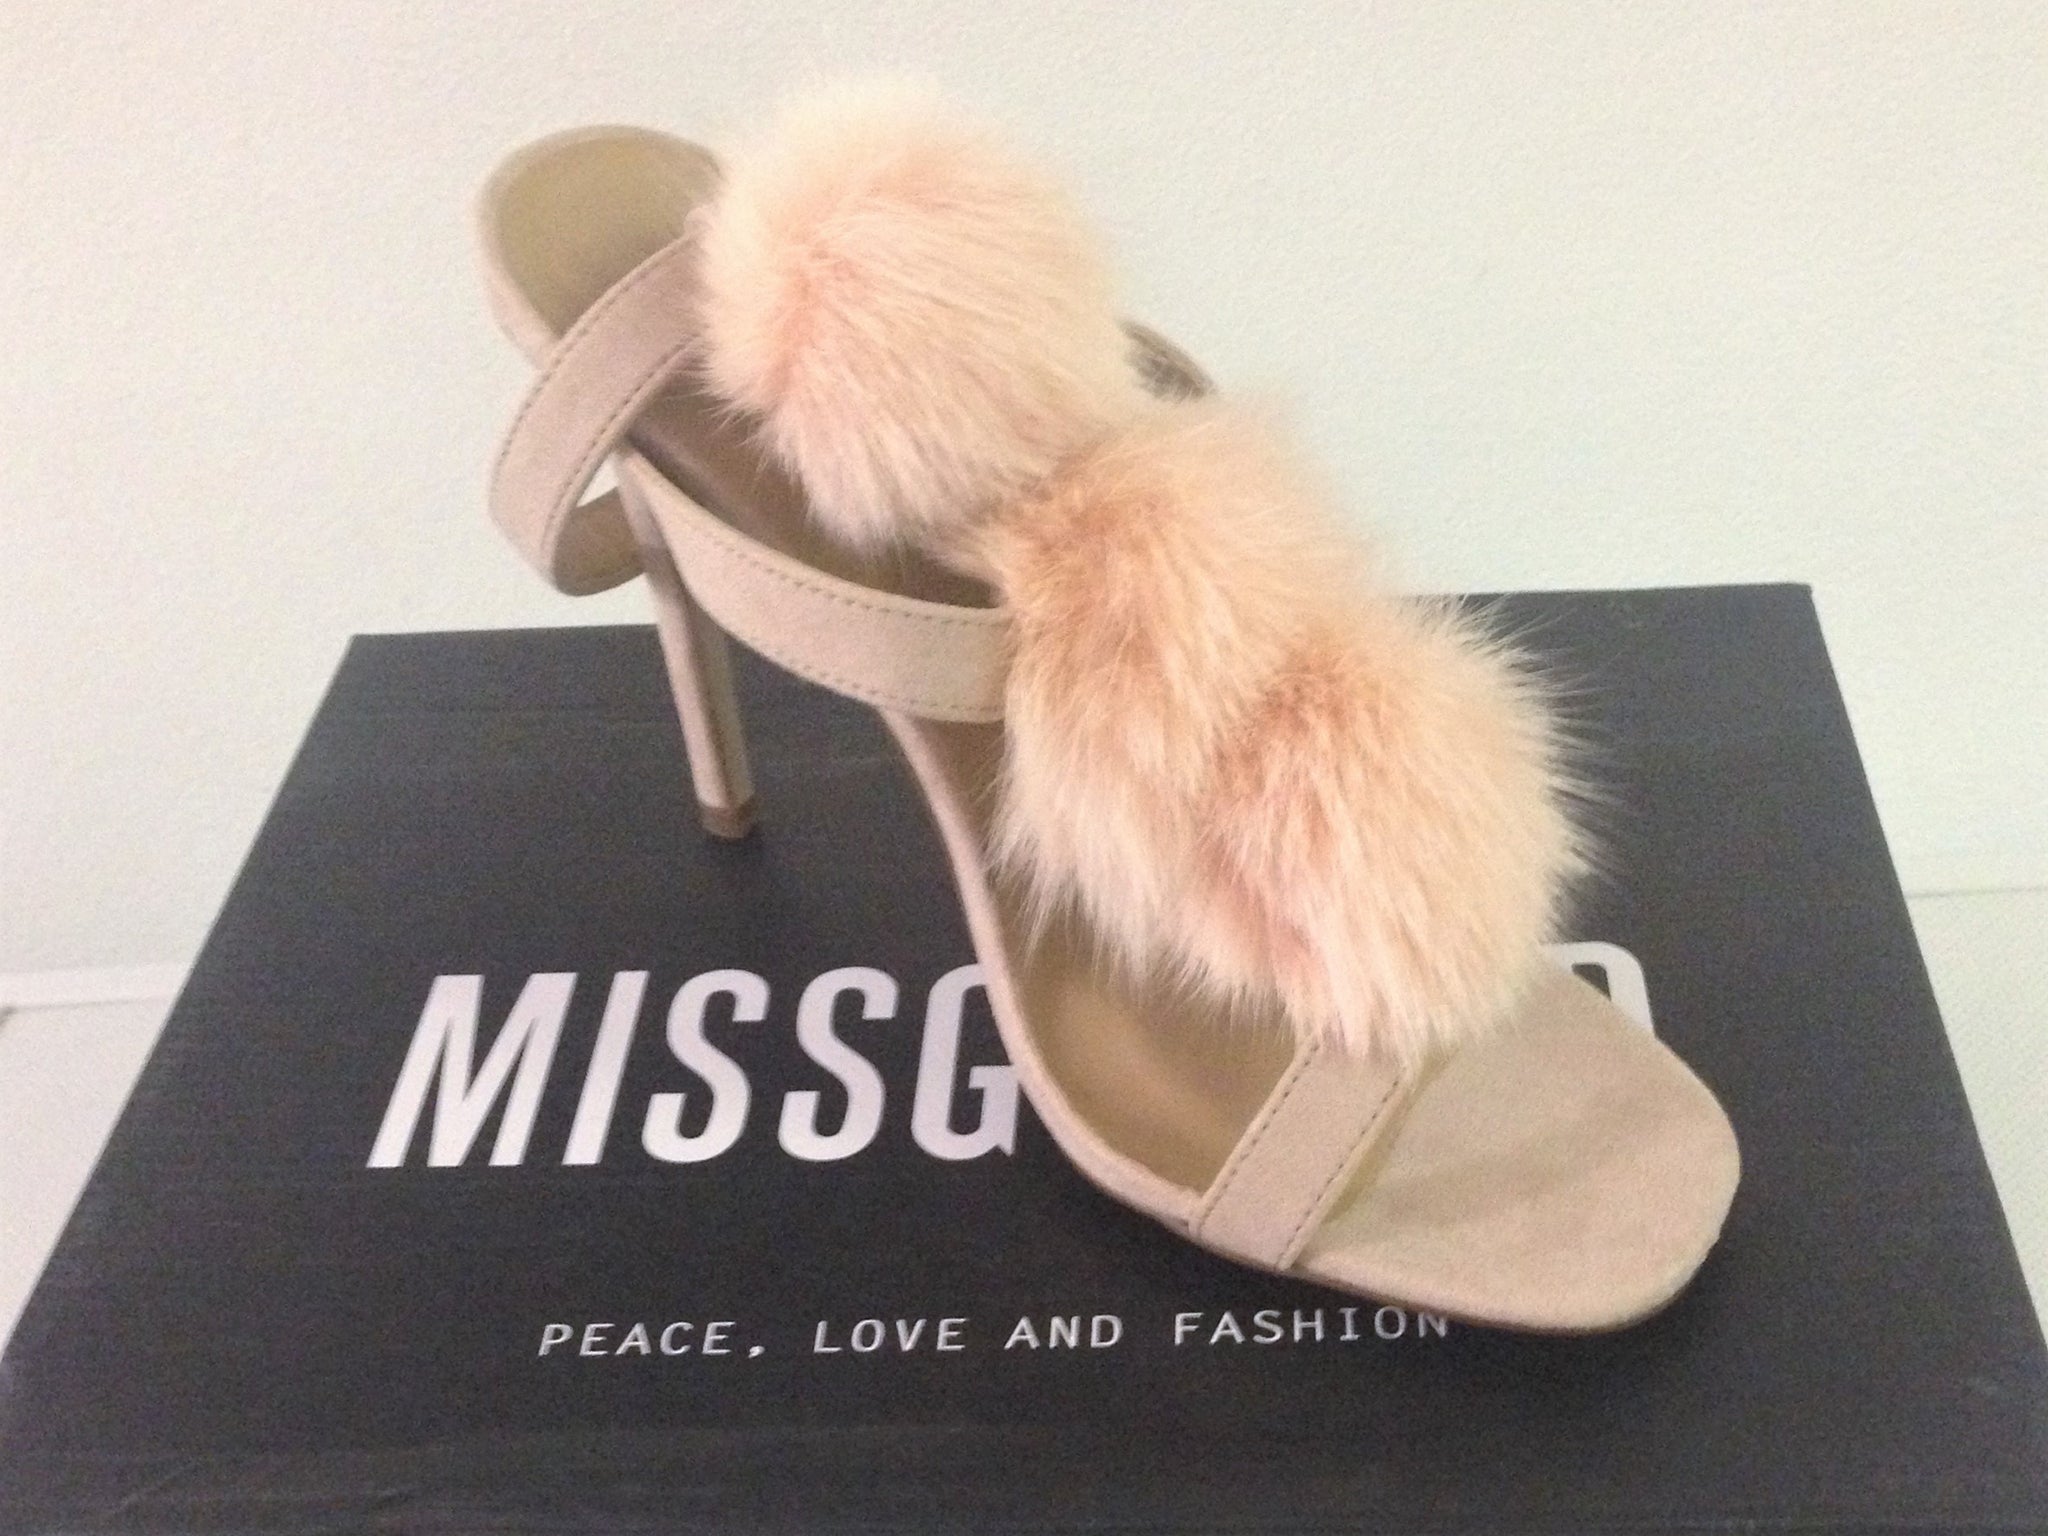 Shoes by fur-free company Missguided purchased by HSI UK and tested positive for illegal cat fur 